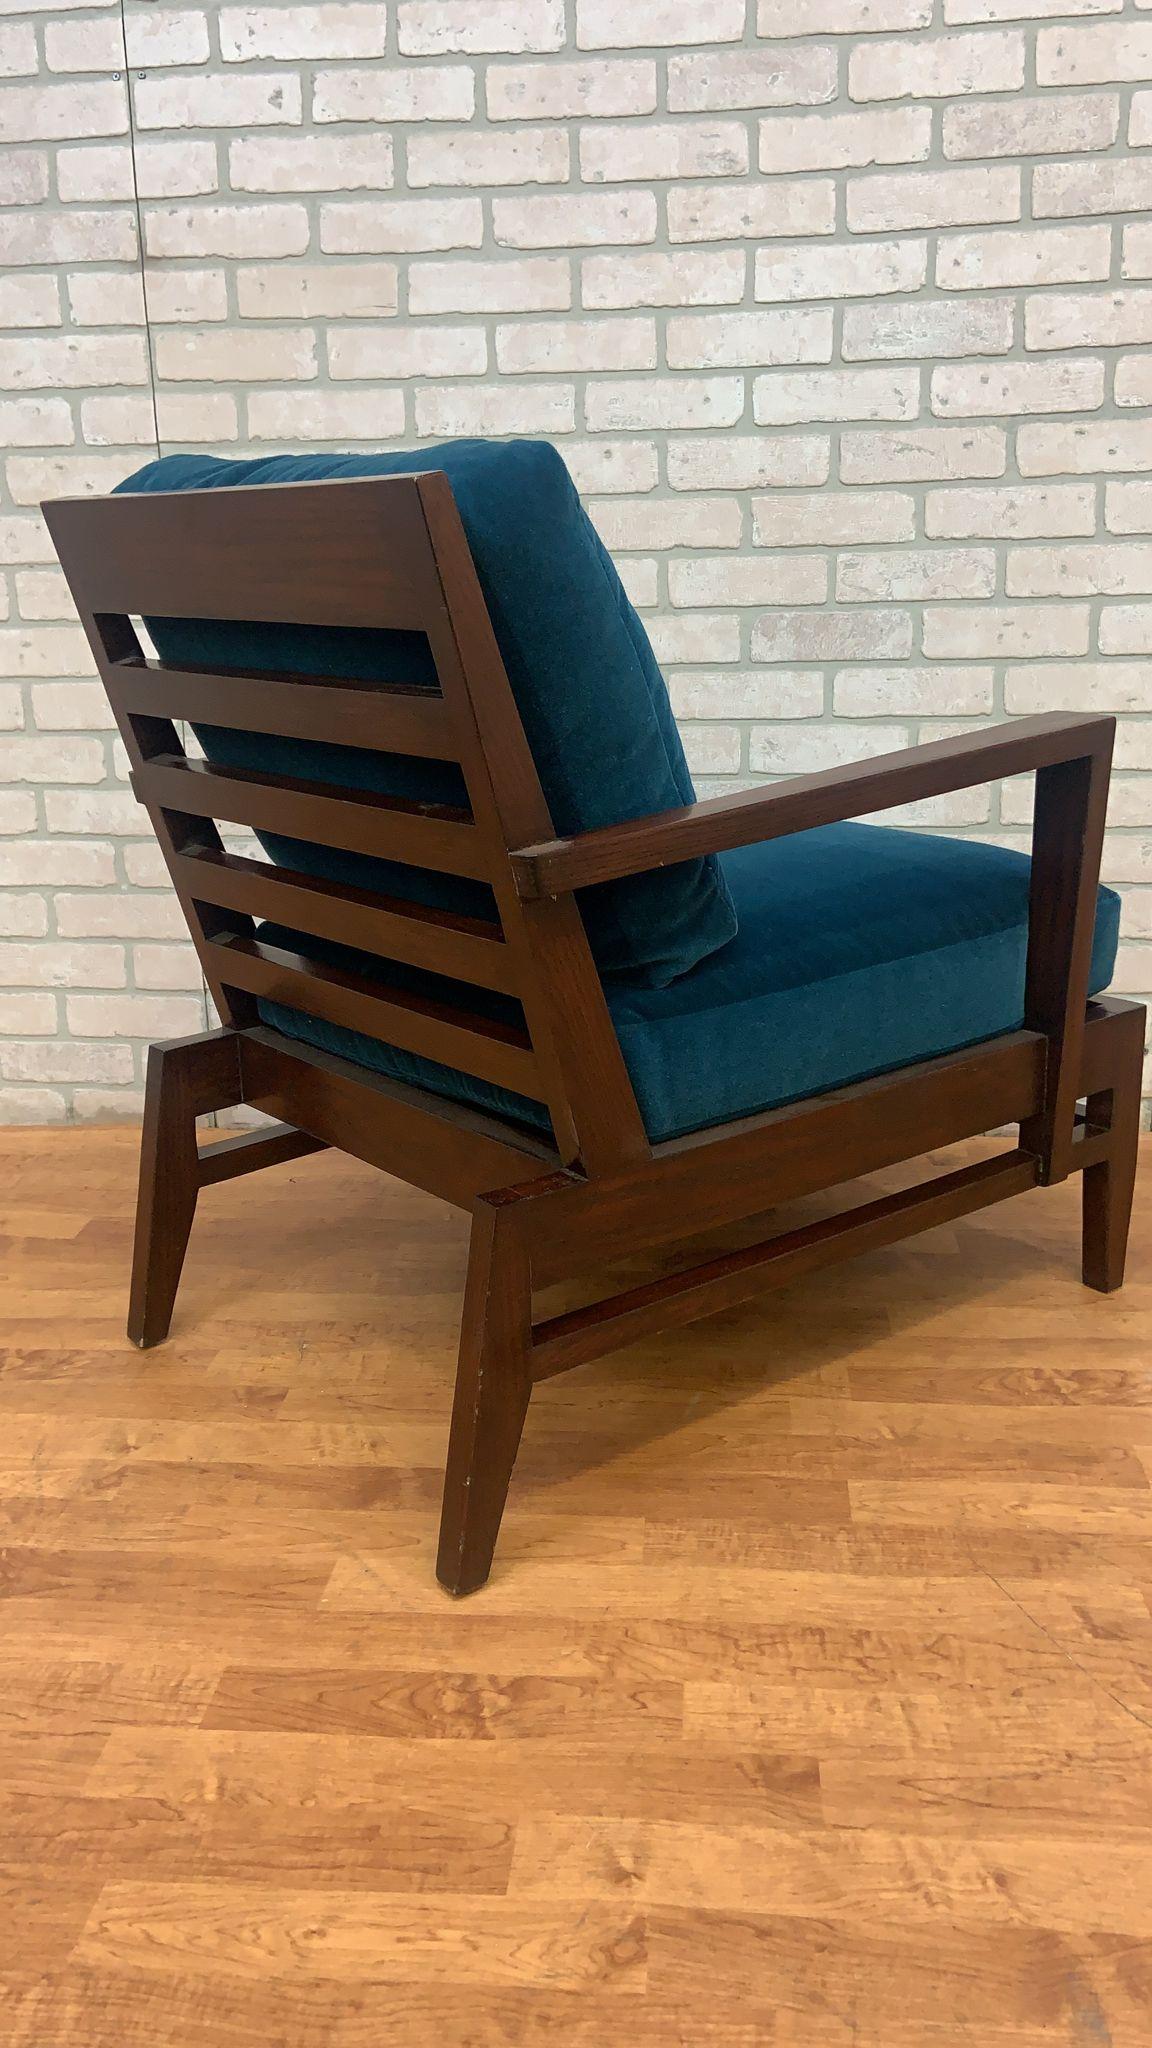 Vintage French René Gabriel Cherry Wood Slat Back Lounge Chair in Teal Mohair For Sale 2